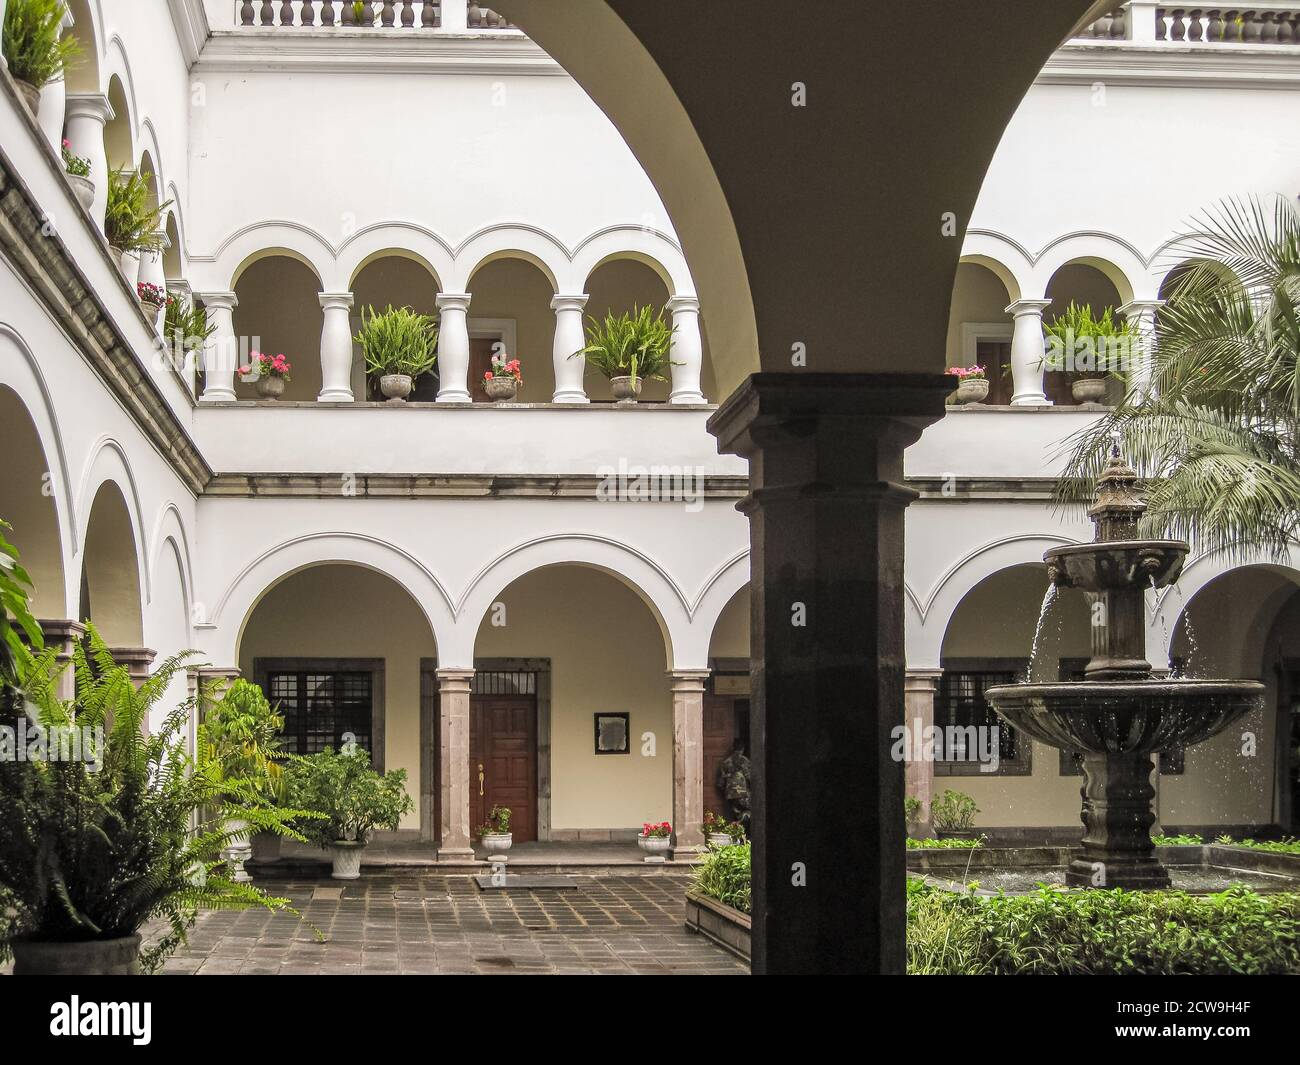 Quito, Ecuador - December 2, 2008: Inner courtyard with green foliage and fountain of Presidential Carondelet Palace. White walls with colonnade. Stock Photo